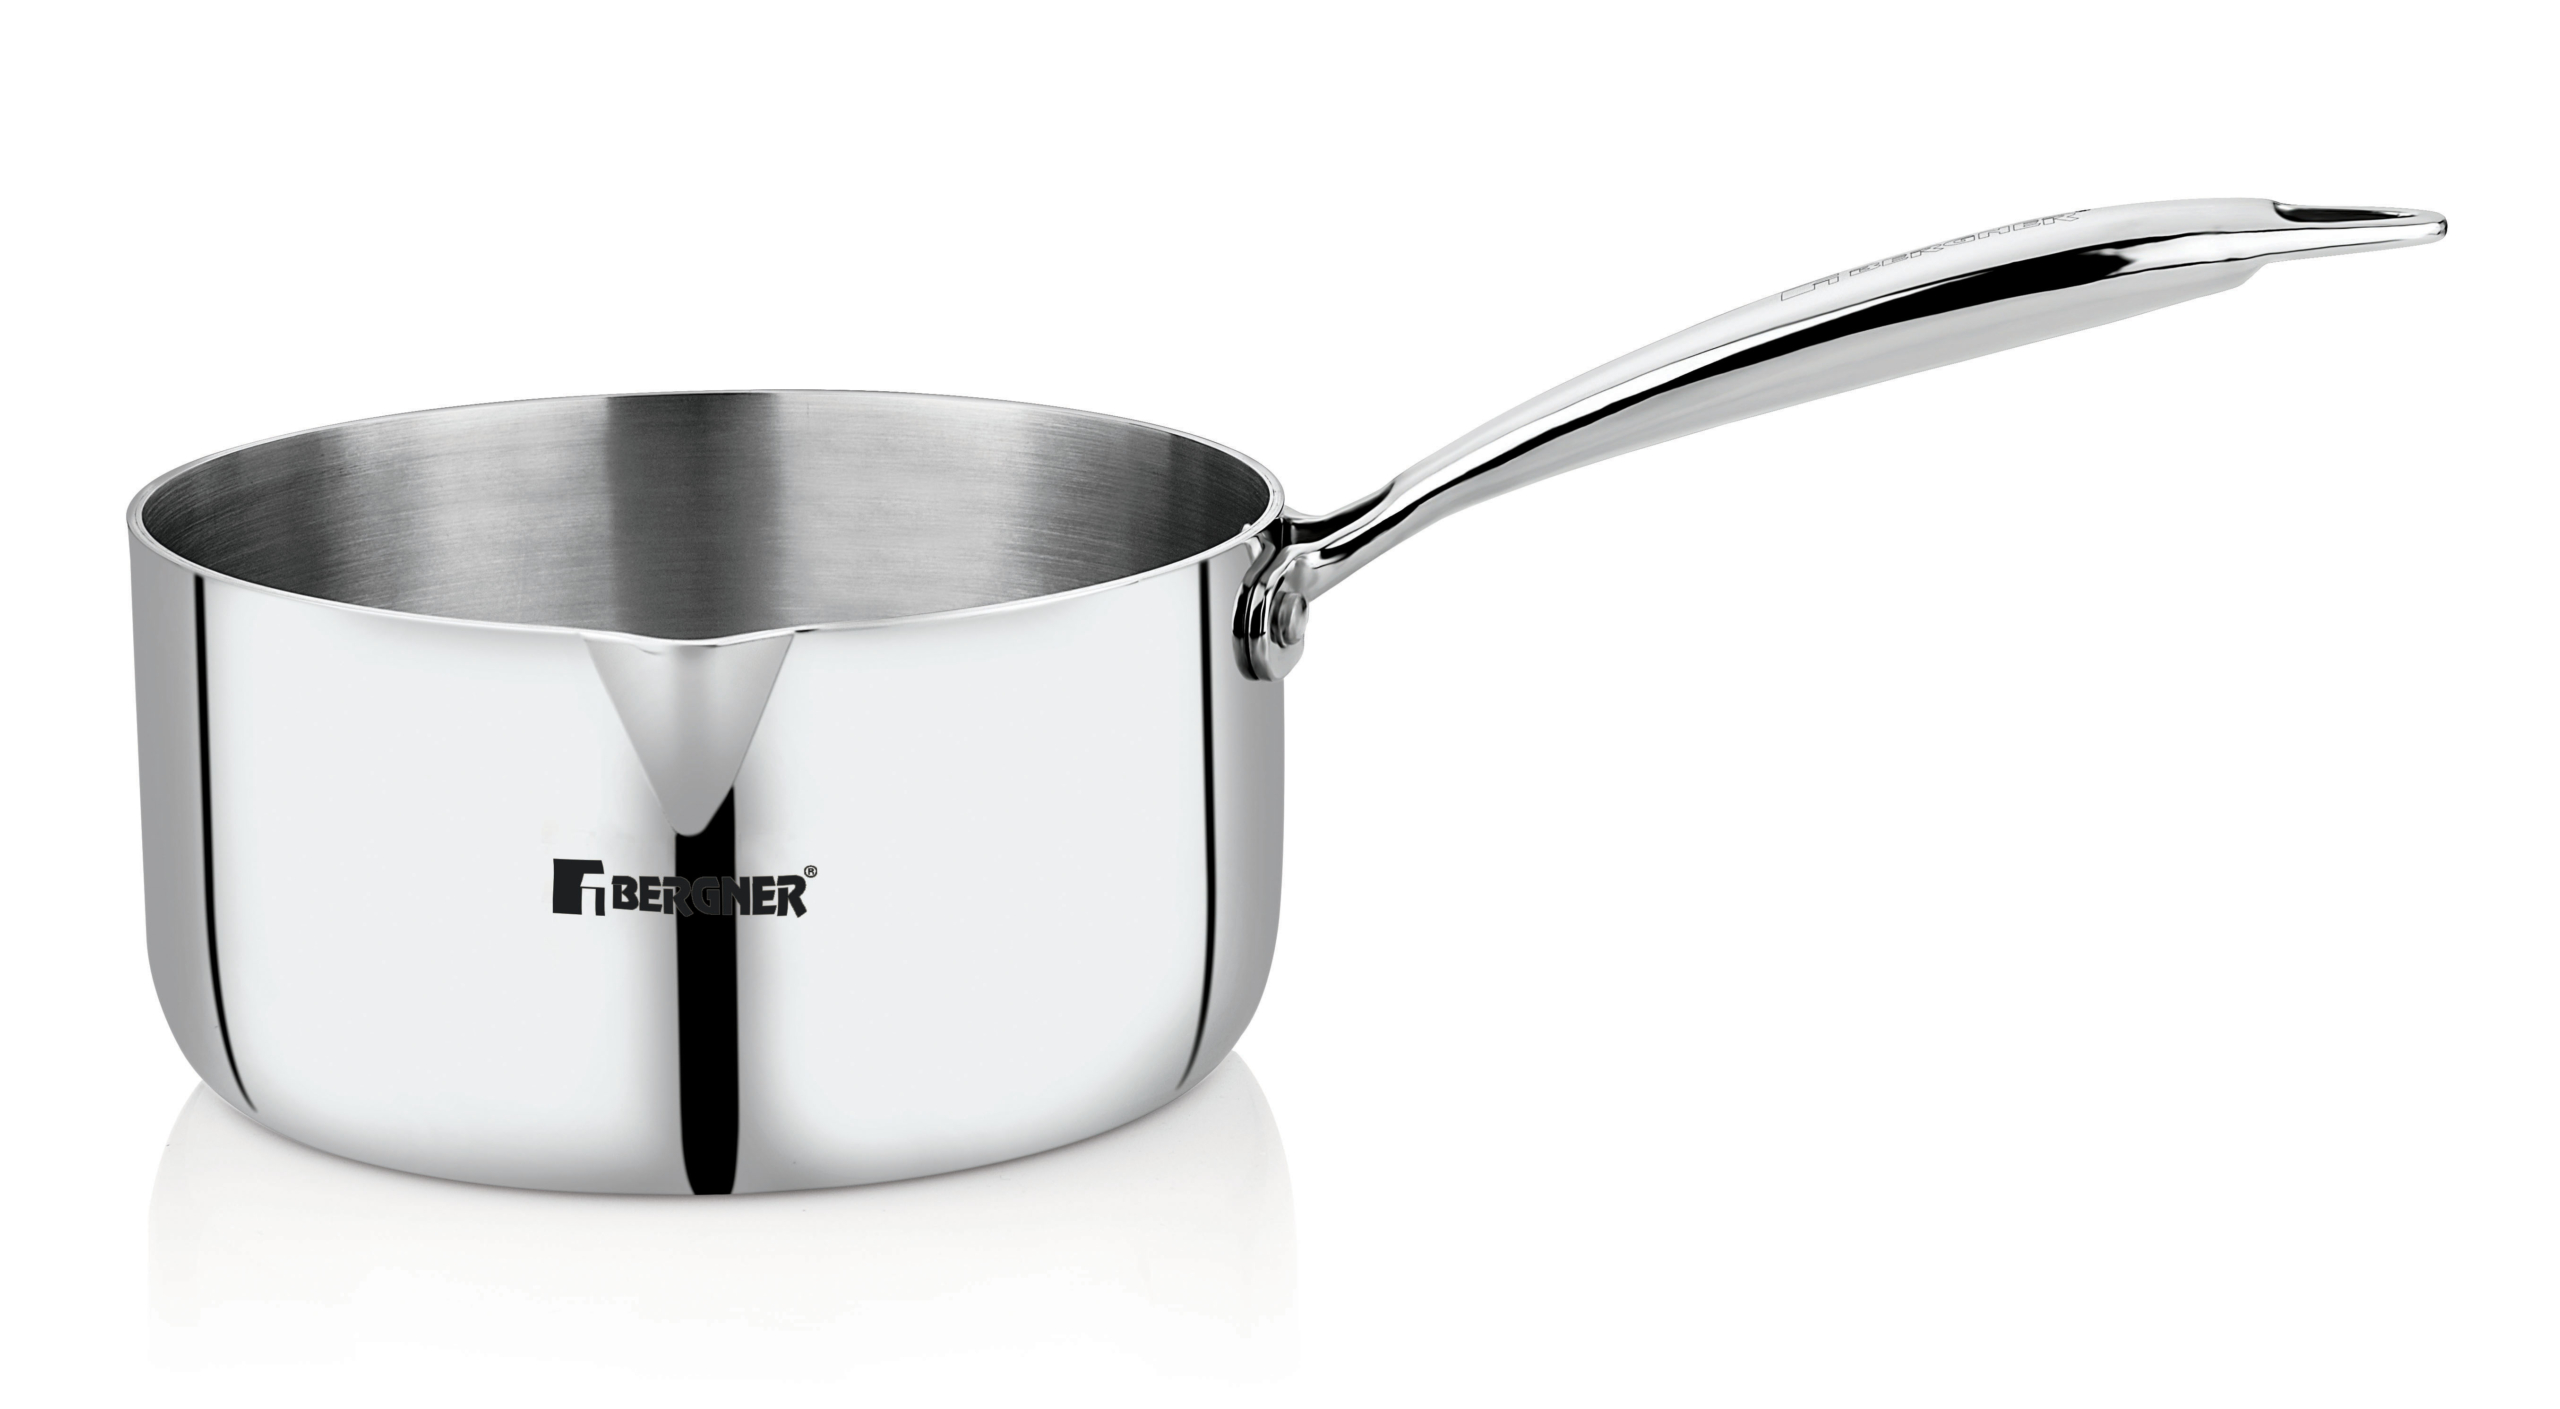 Bergner Argent Silver Triply Stainless Steel Saucepan with 16 cm size and 1.7 Ltr capacity